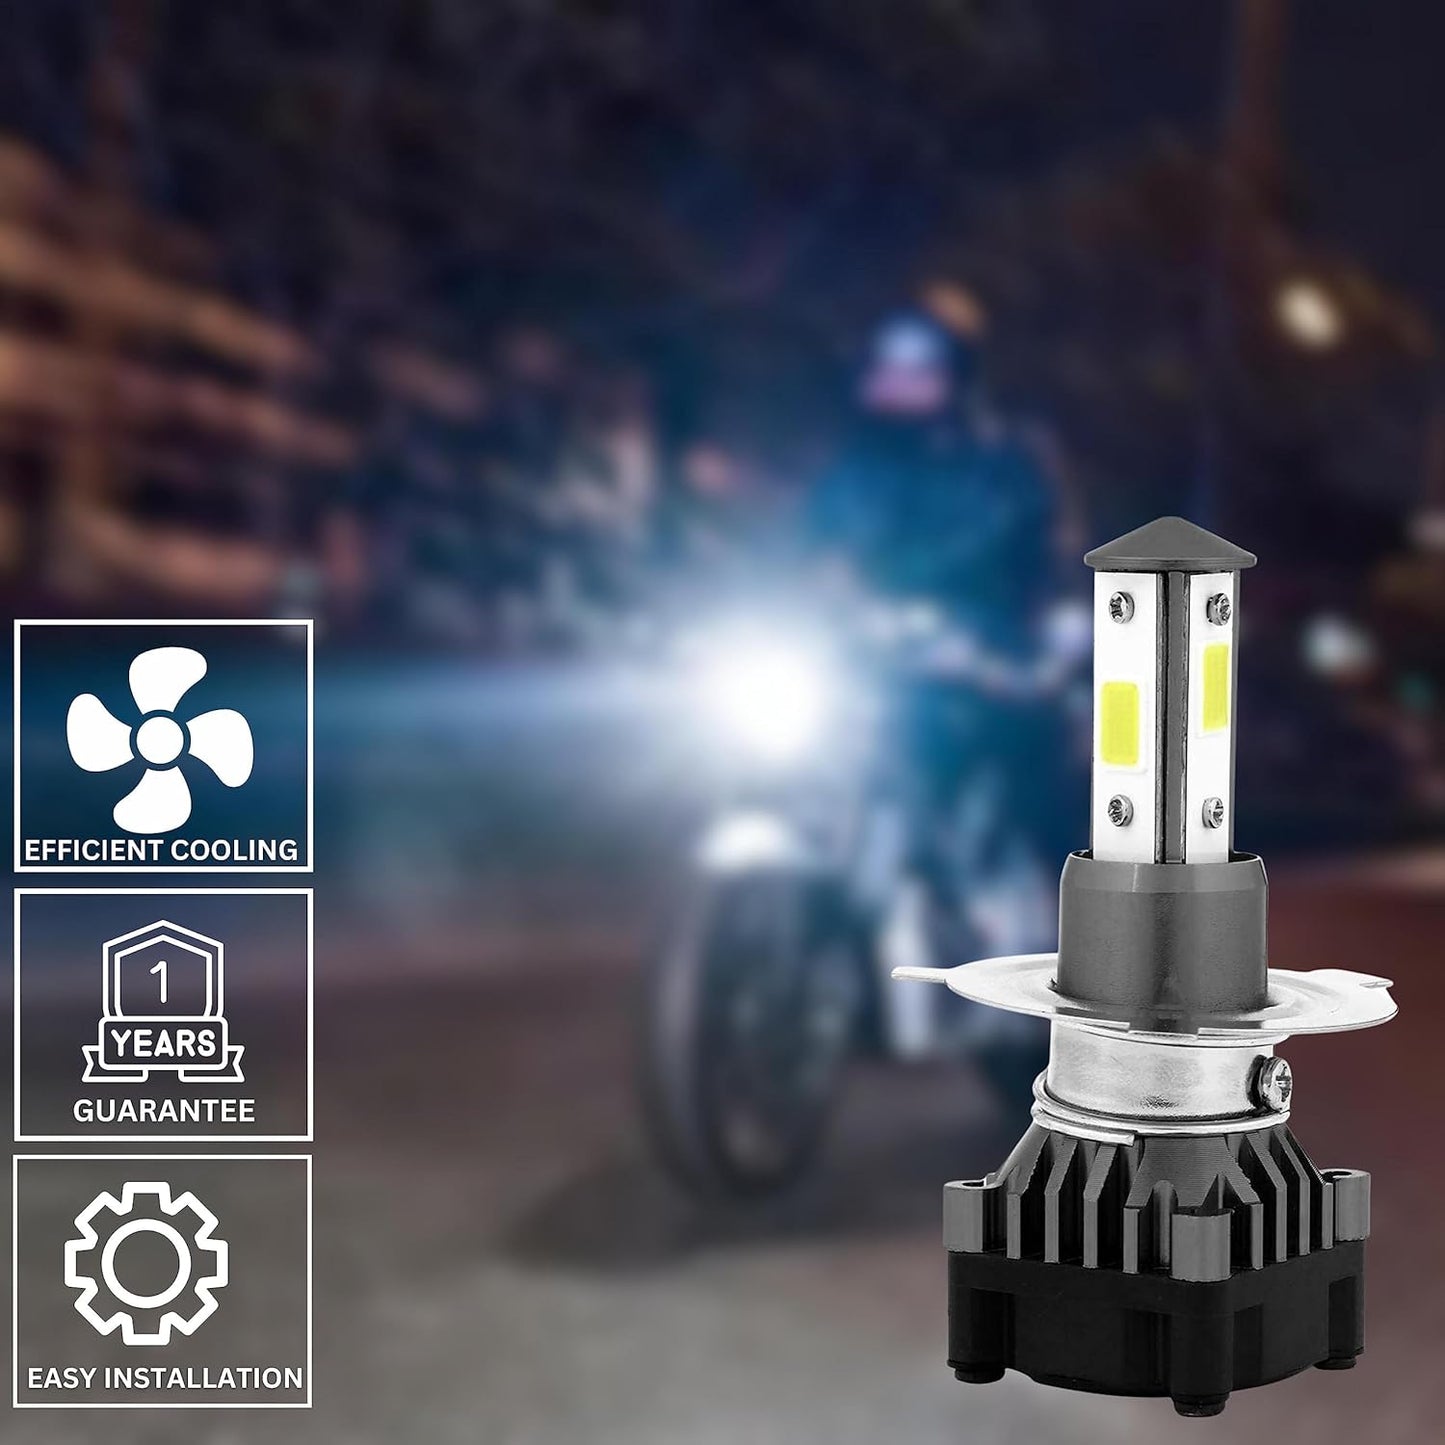 Super 4101 HS1 LED Headlight Bulb for Bikes & Scooters - High Speed Cooling Fan, 3000 Lumens, 6000K Pure White - Pack of 1